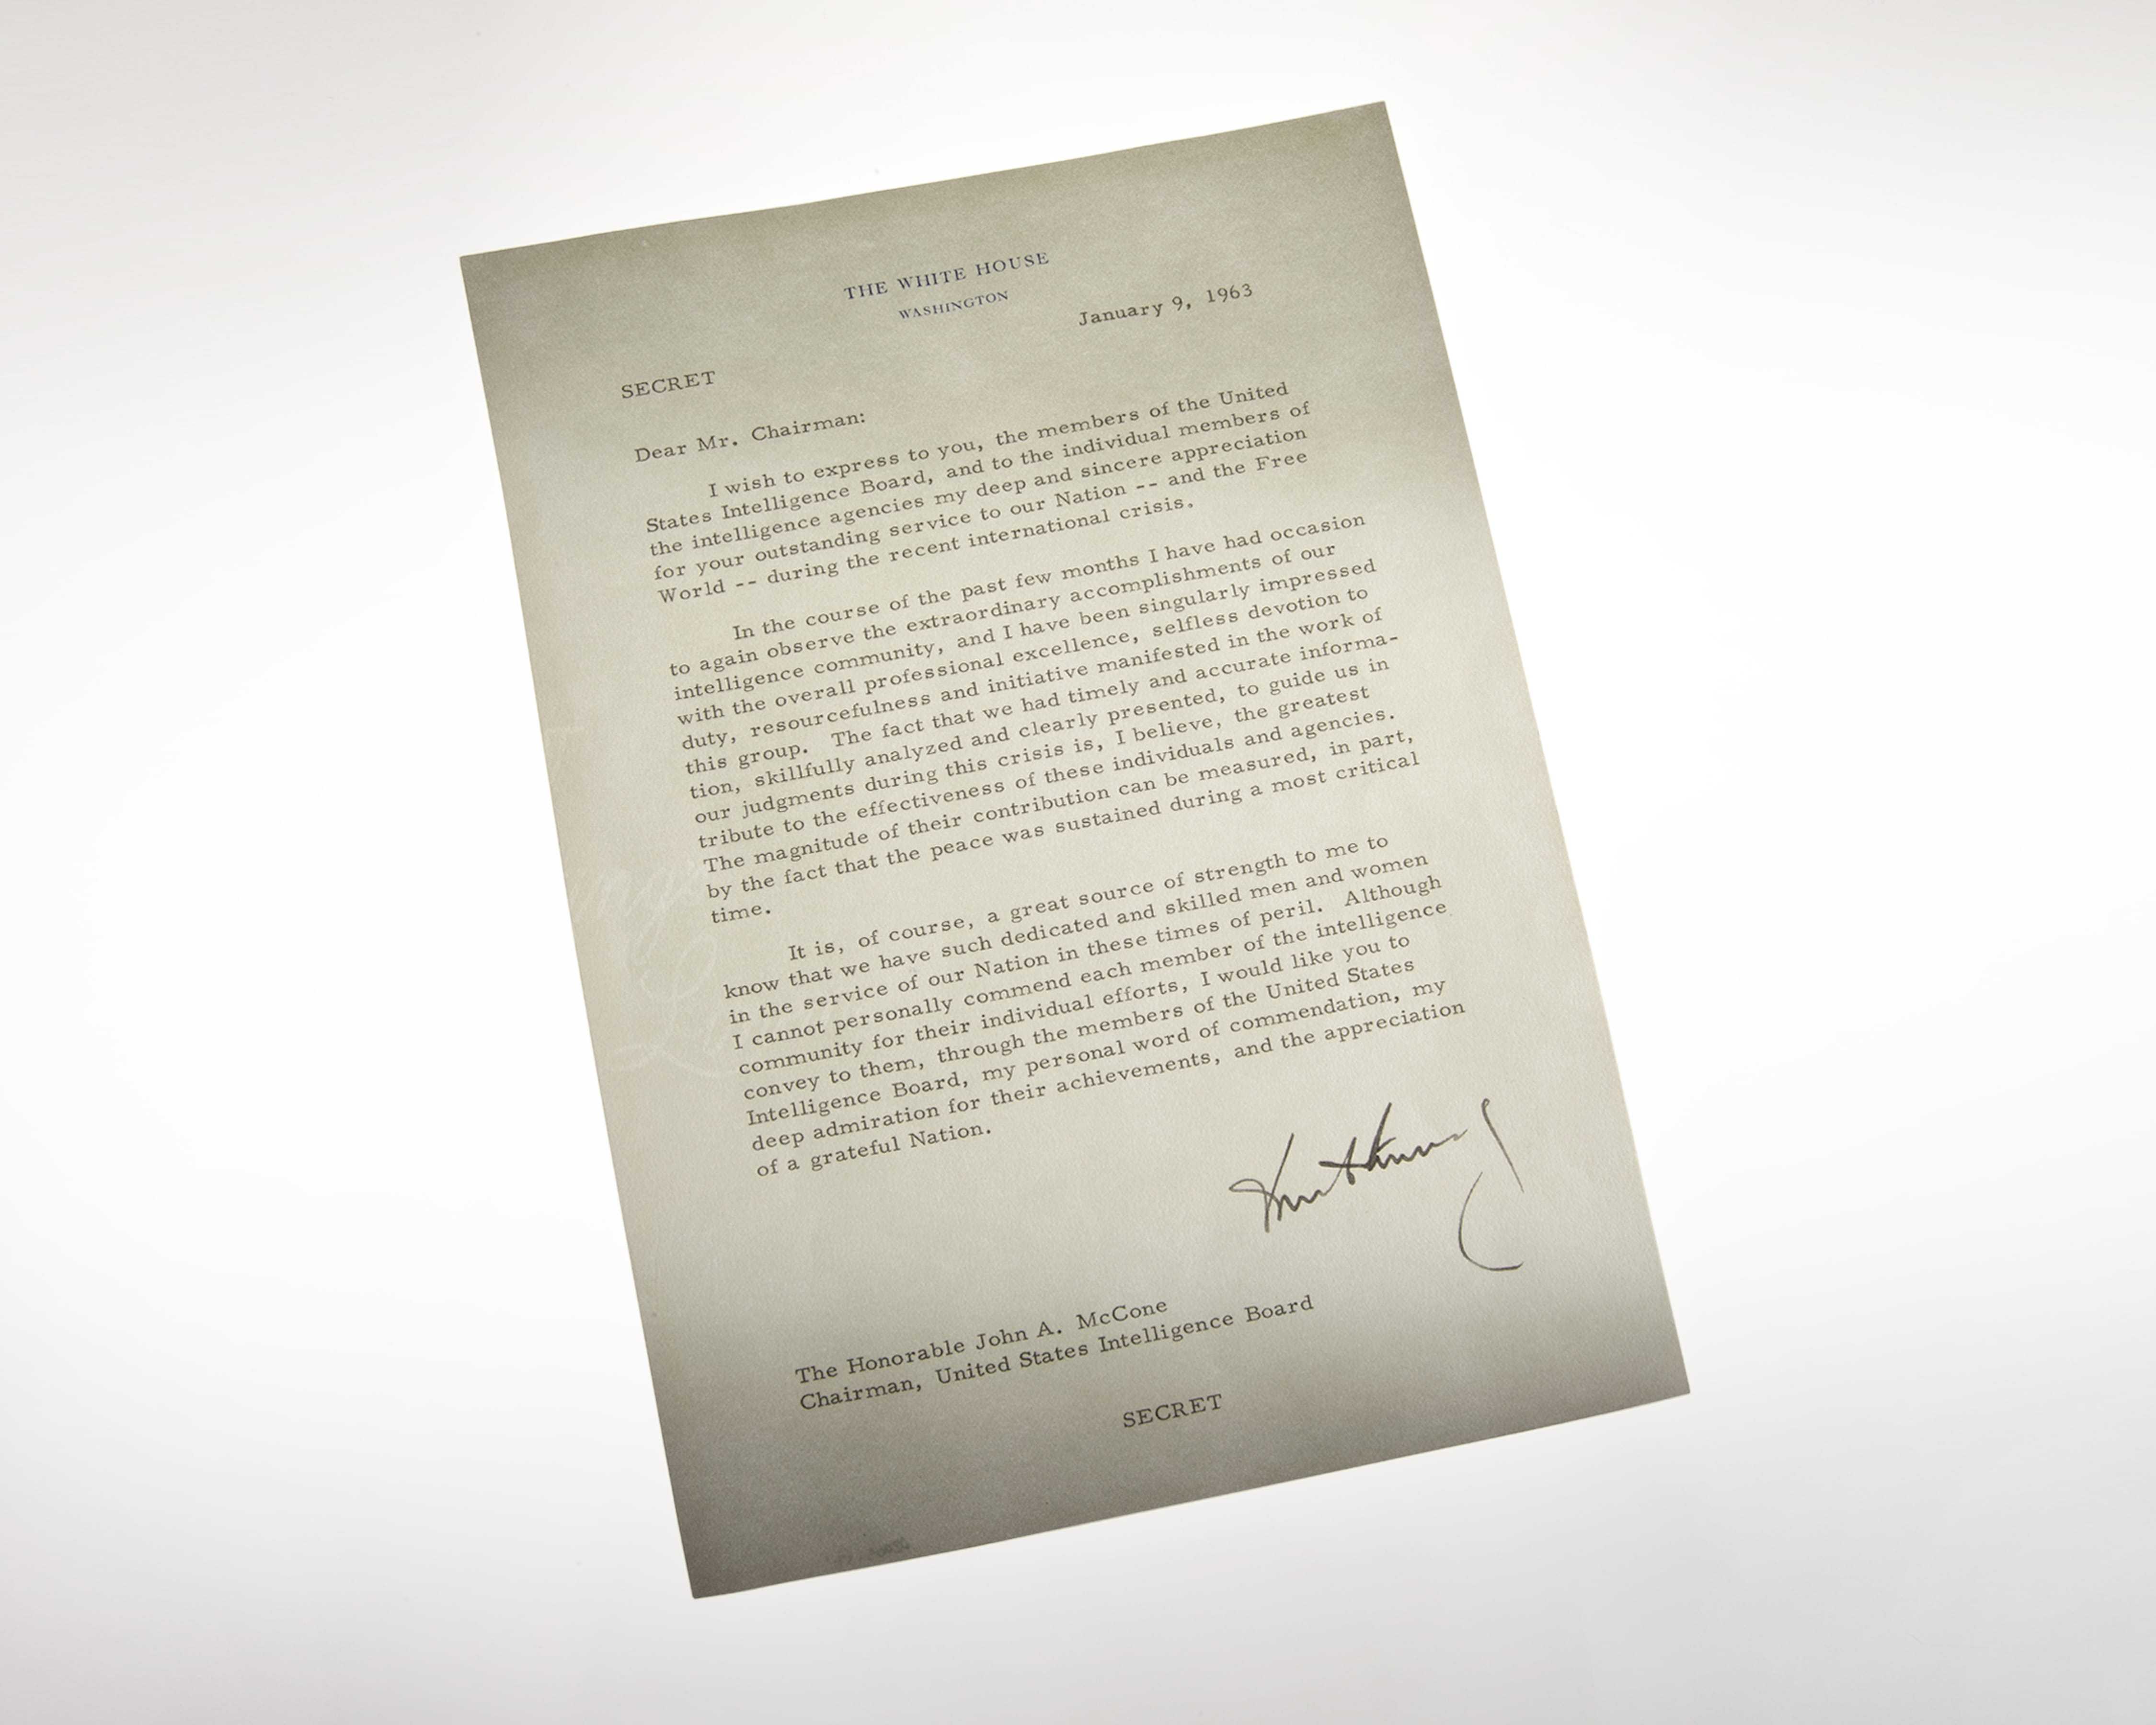 A three-paragraph letter on White House stationery signed at the bottom by President Kennedy